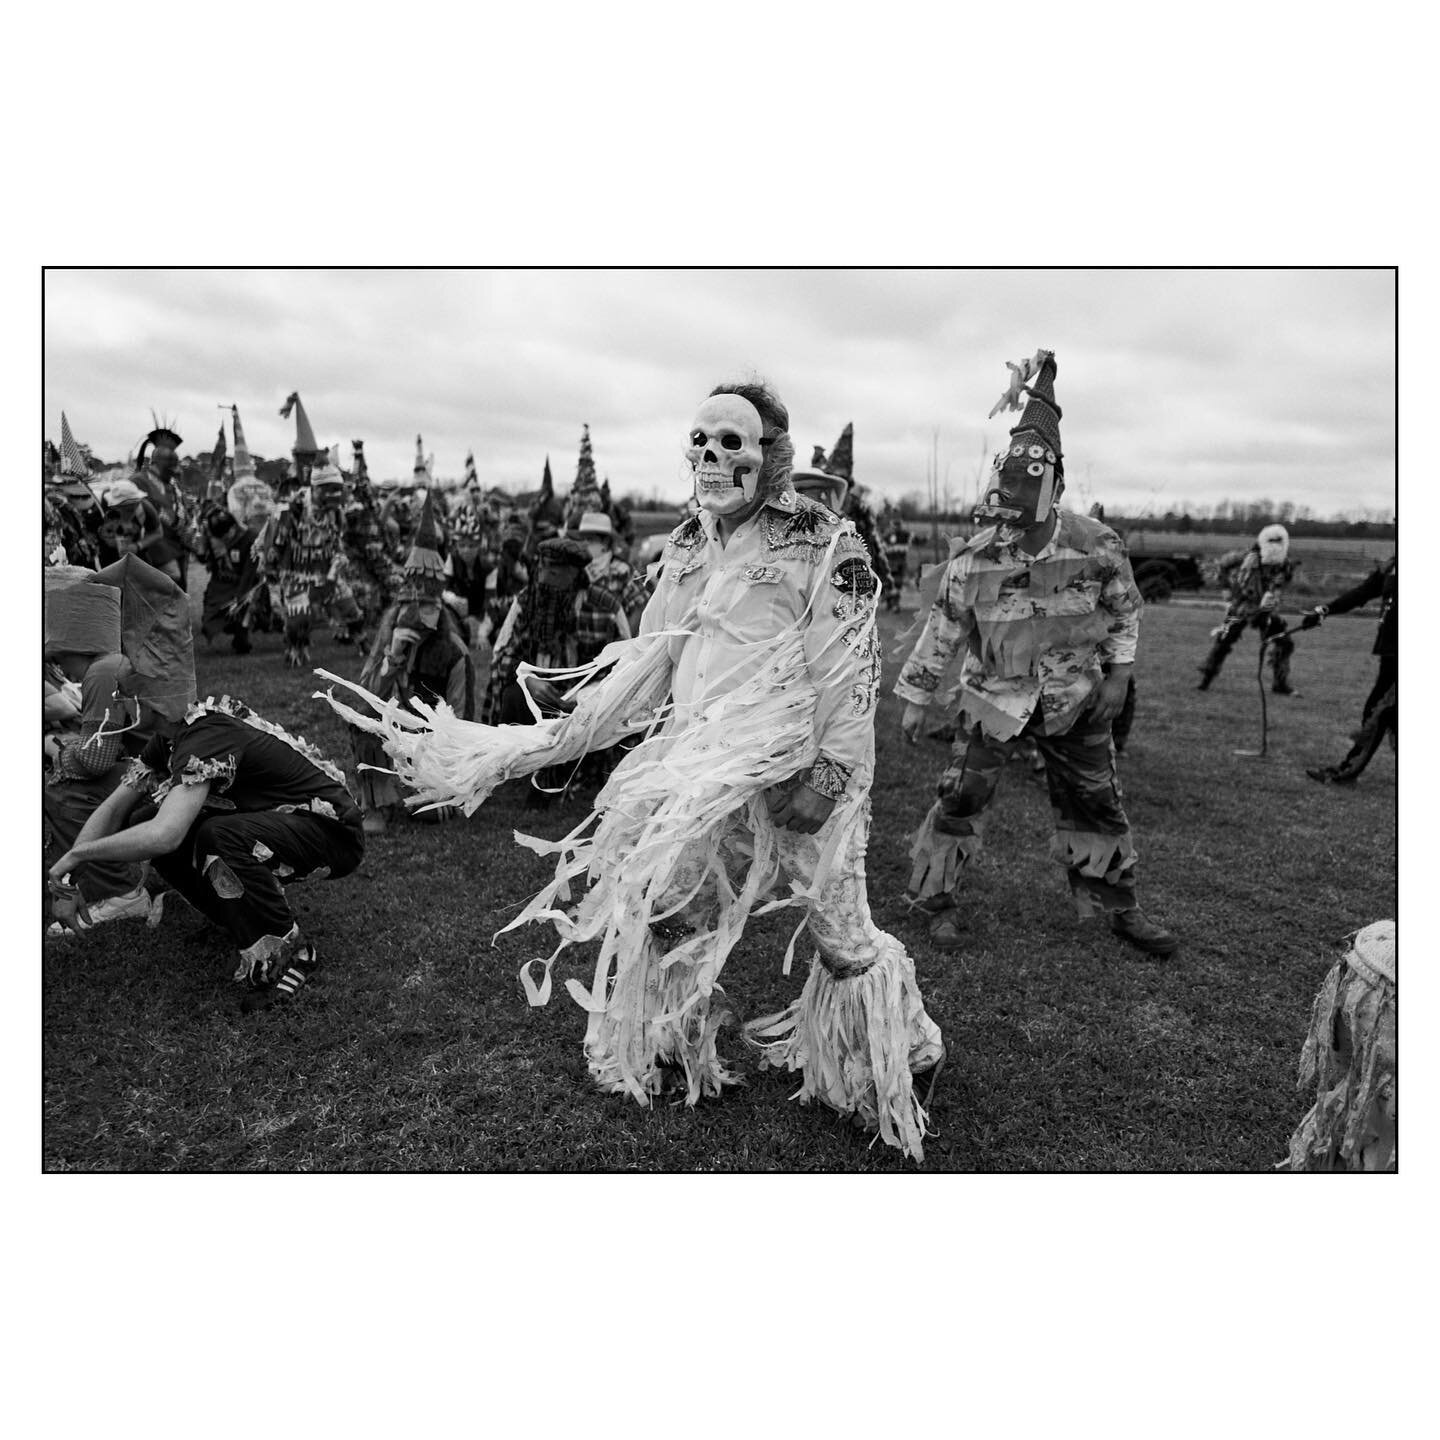 💥Faquetaique💥
Another amazing year celebrating and photographing traditional Cajun Mardi Gras, or Courir de Mardi Gras.
I feel incredibly grateful to have been welcomed into this community and tradition. There are few things that I&rsquo;ve witness